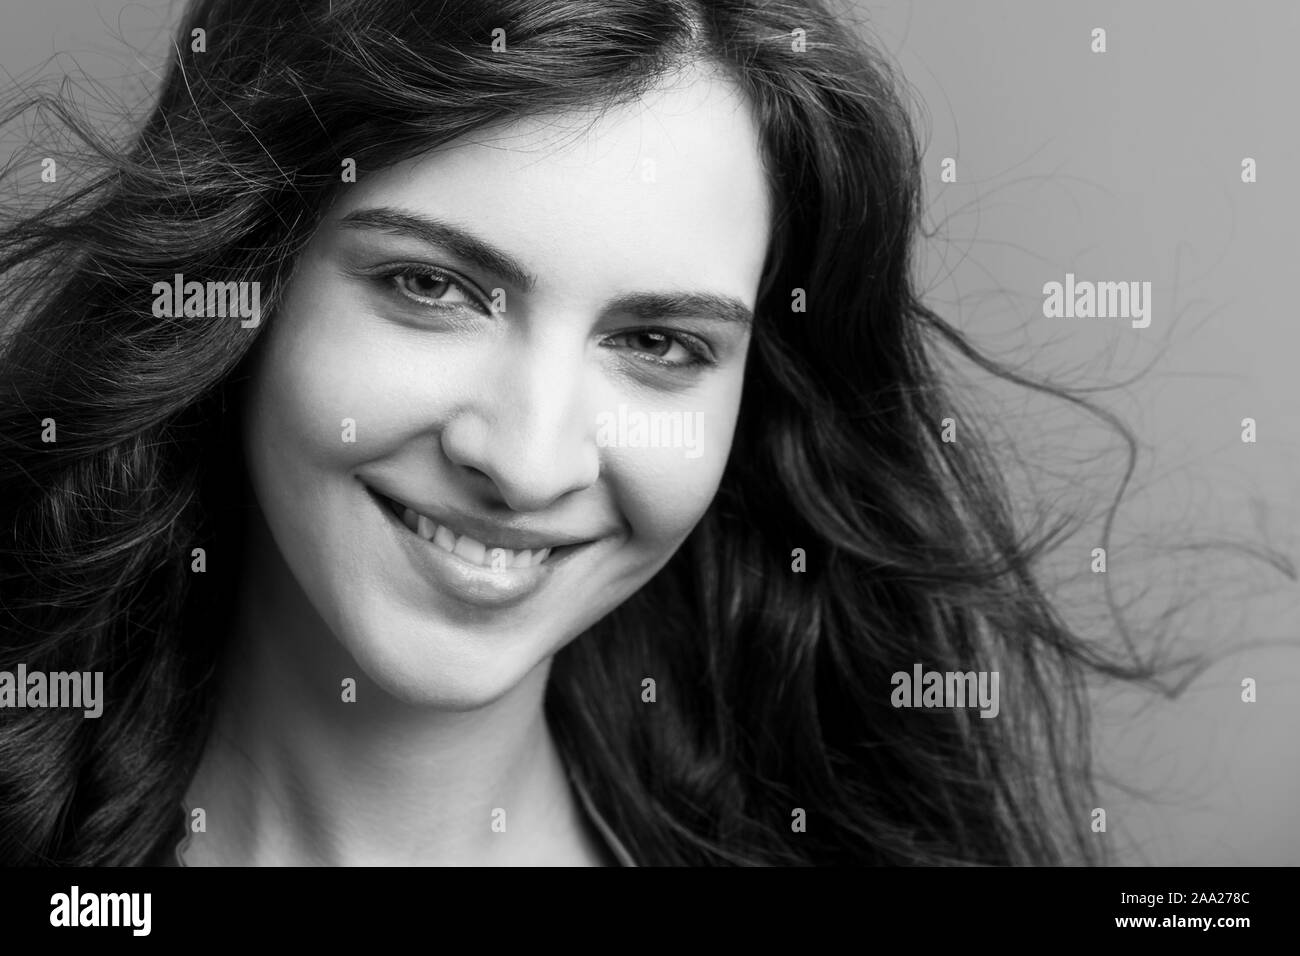 black and white portrait of a young beautiful woman Stock Photo